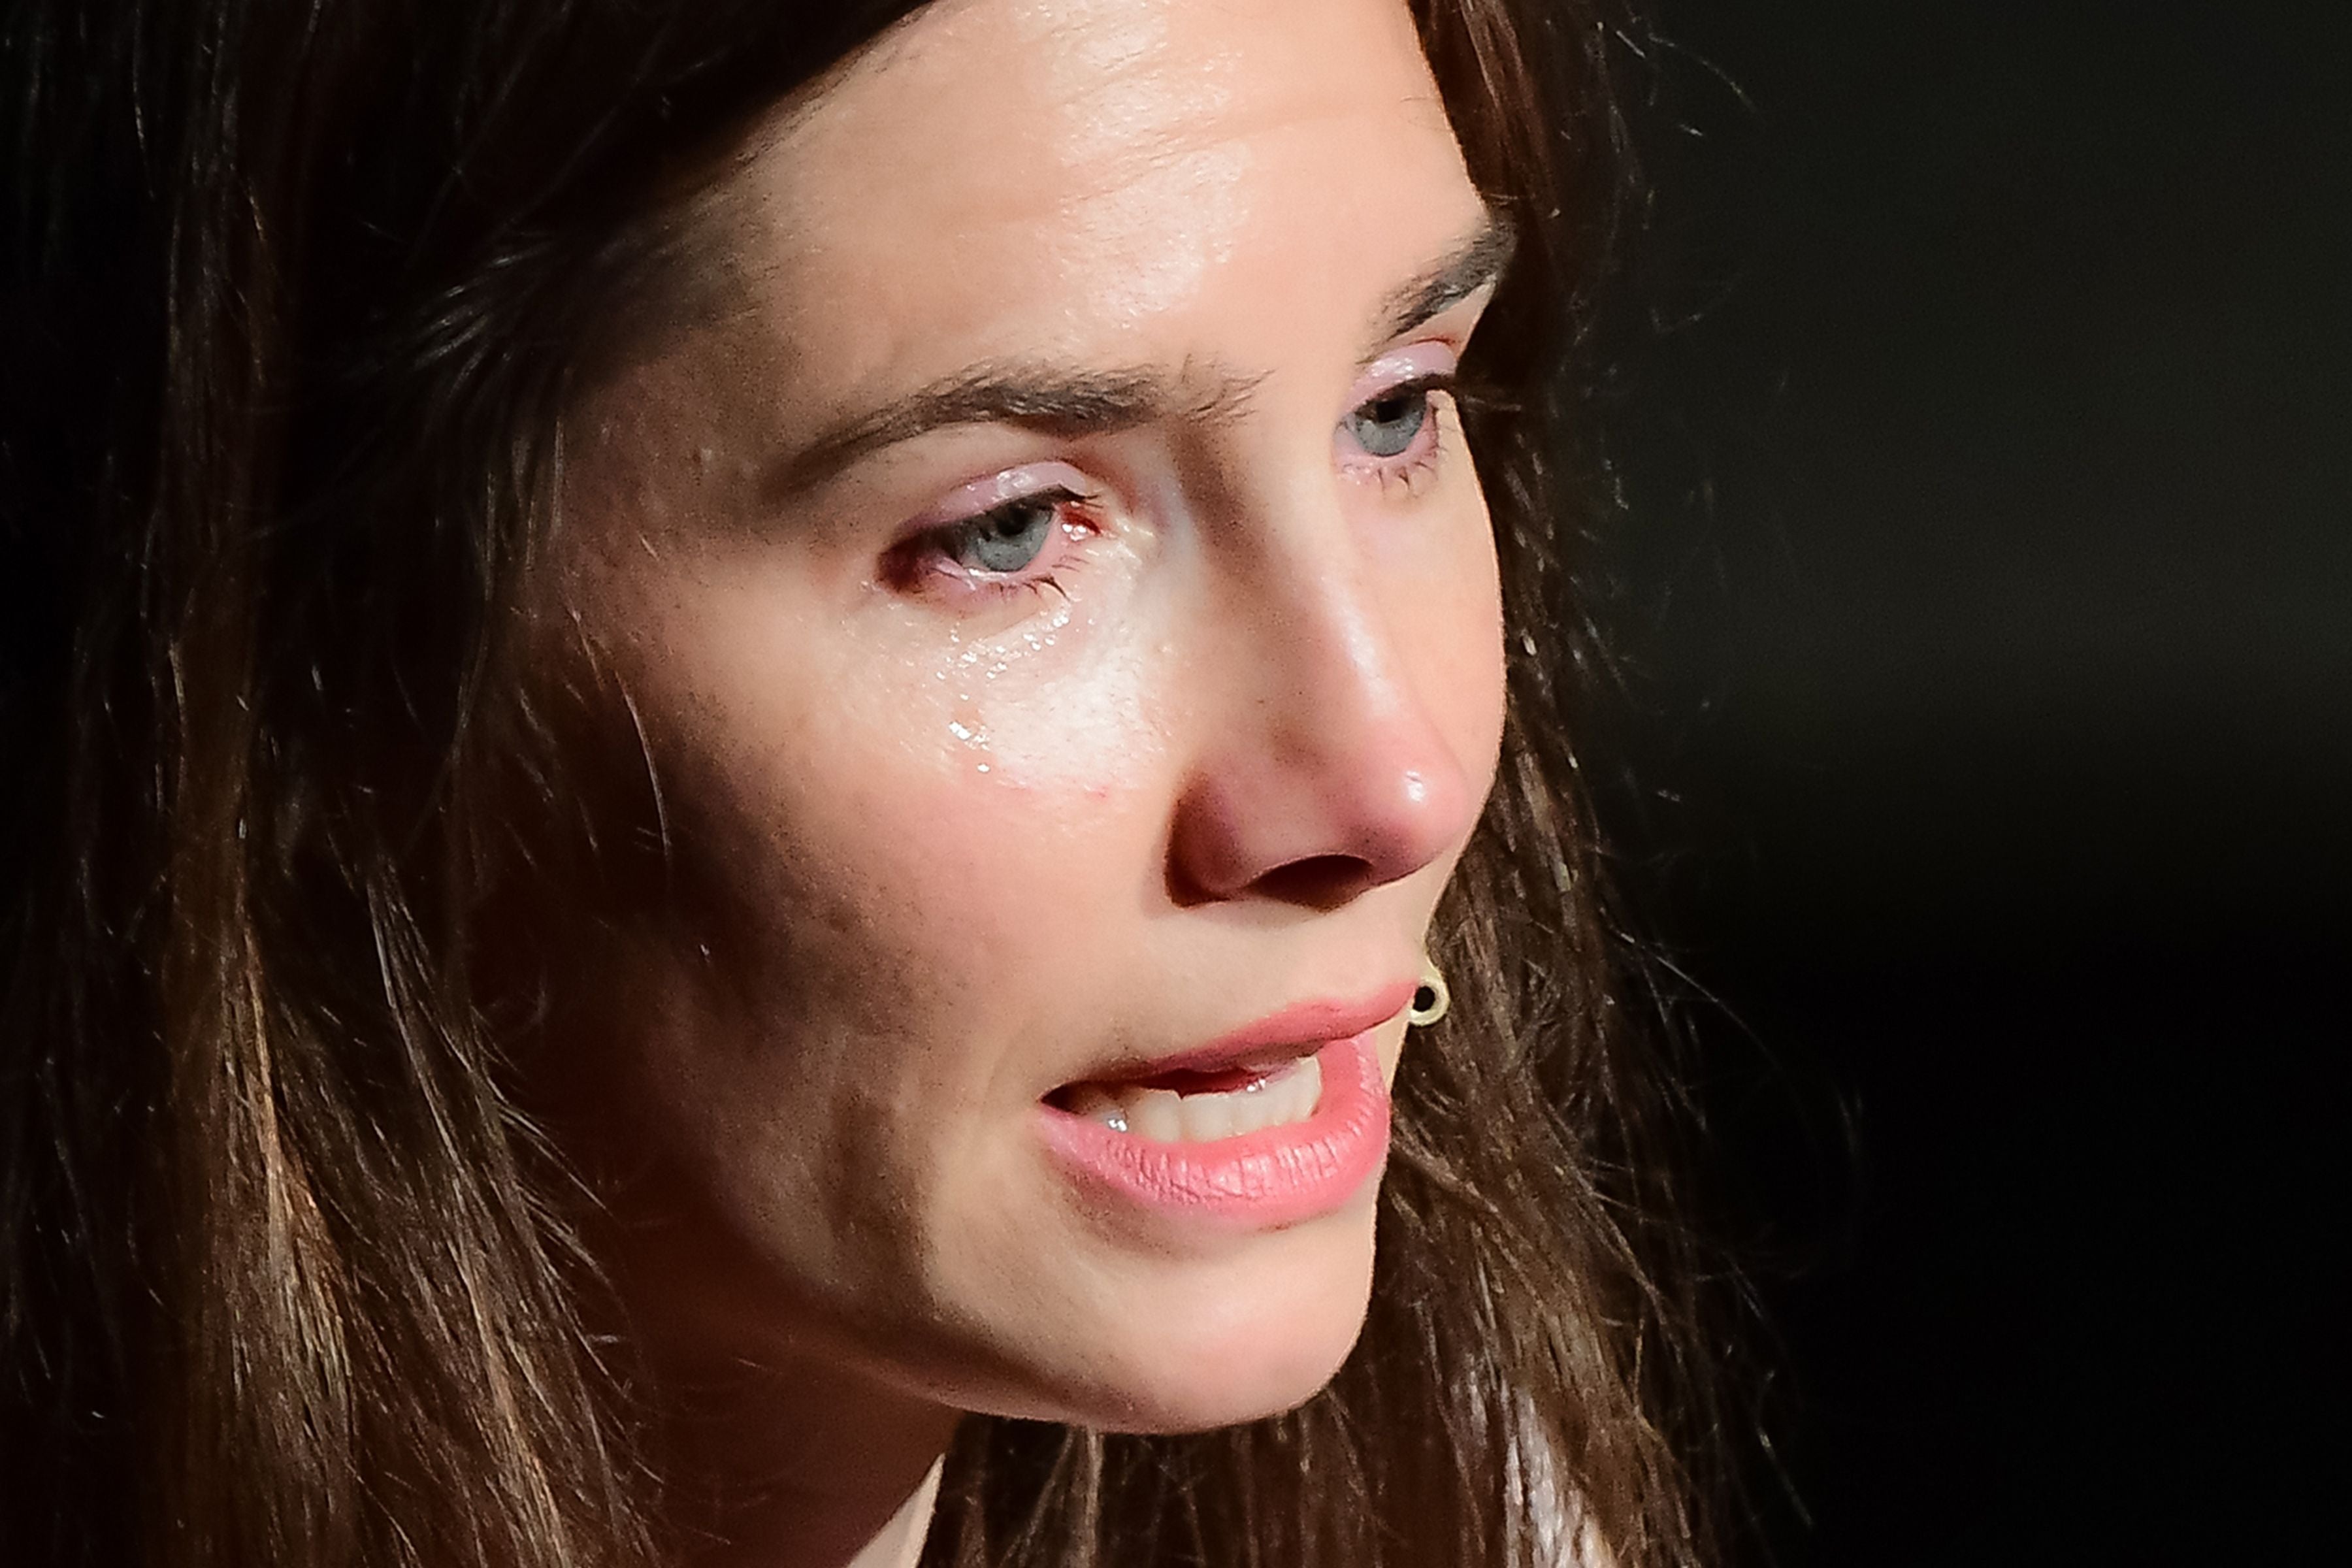 Amanda Knox, who said she supported NXIVM's petition on leader's court case